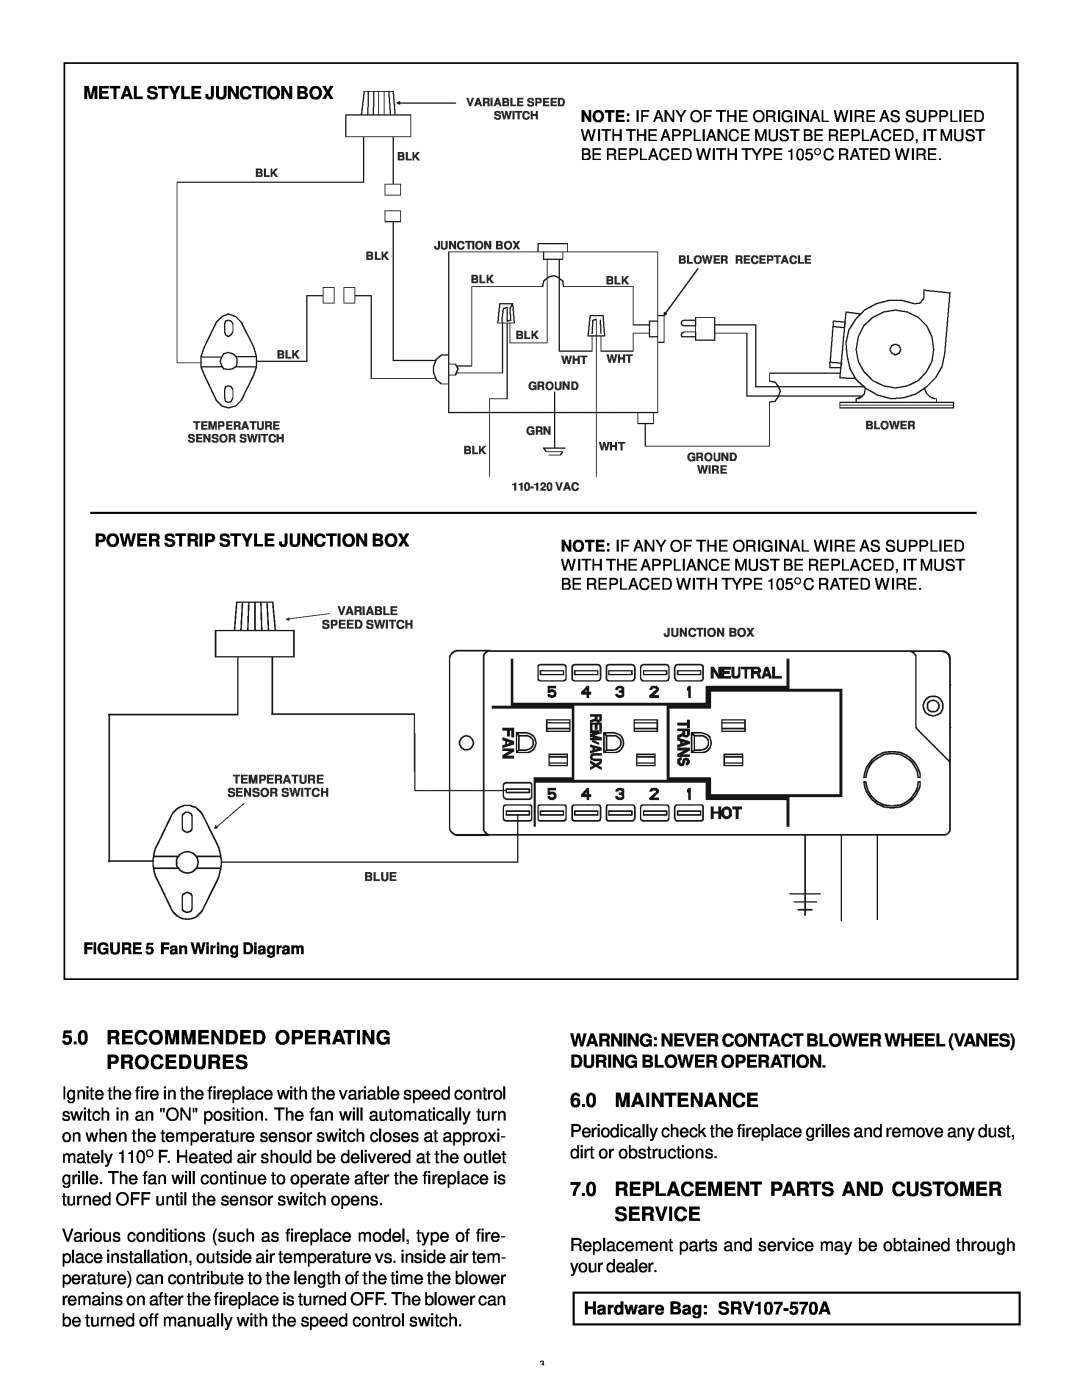 Hearth and Home Technologies GFK-160A 5.0RECOMMENDED OPERATING PROCEDURES, Maintenance, Metal Style Junction Box 